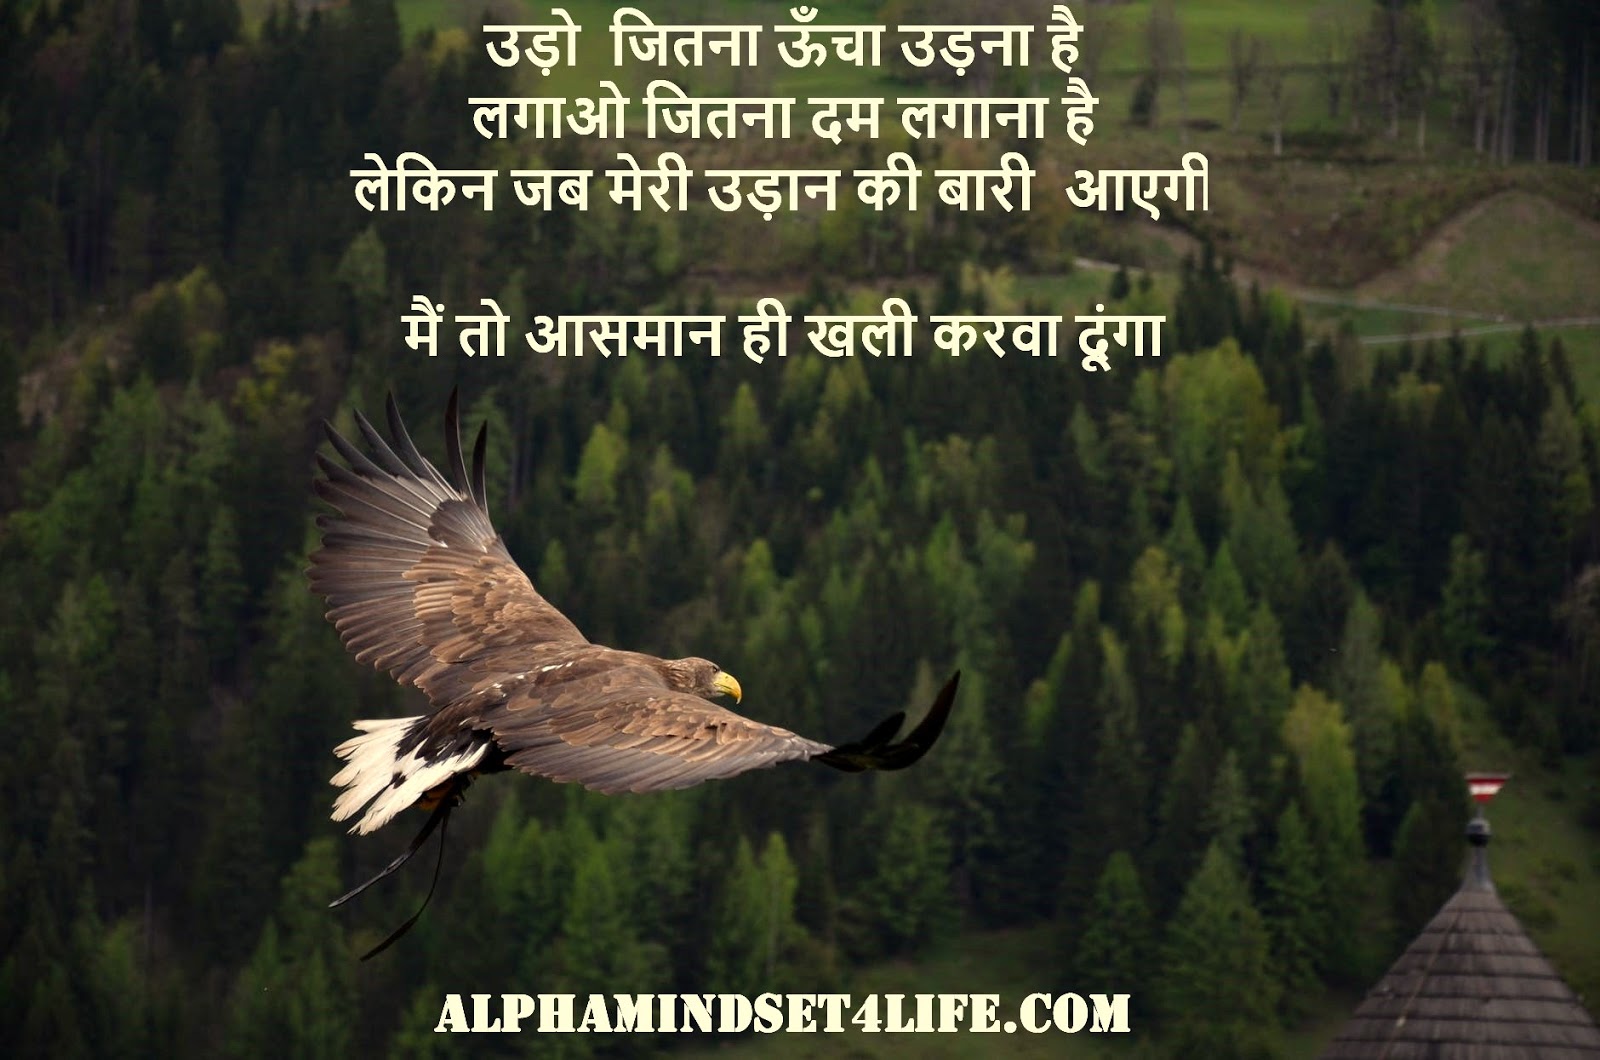 100 Top Upsc Ias Motivational Quotes In Hindi With Images Alphamindset4life